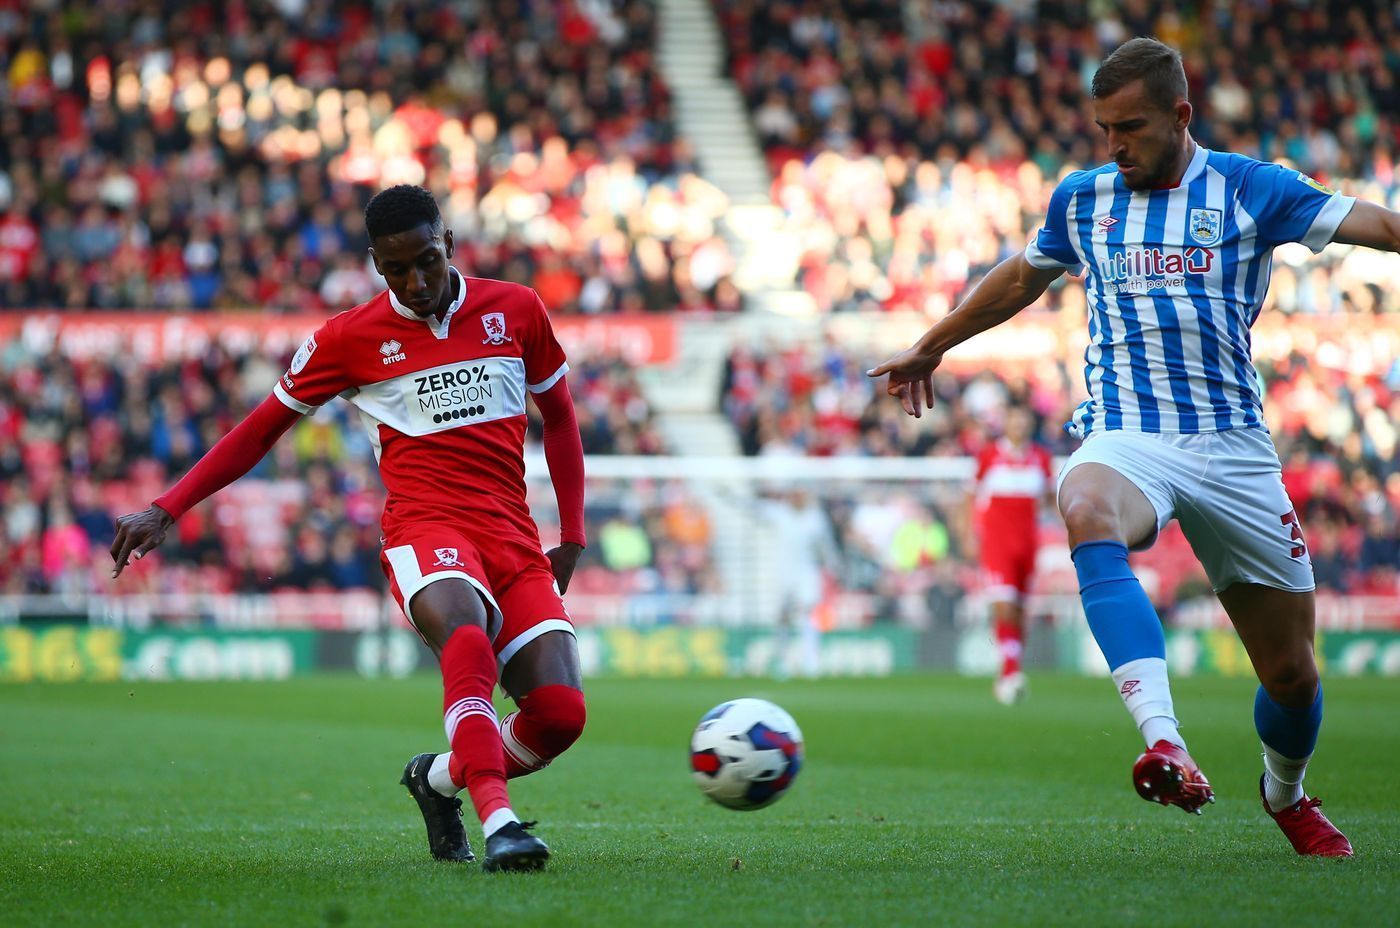 Middlesbrough and Huddersfield have already met once this season